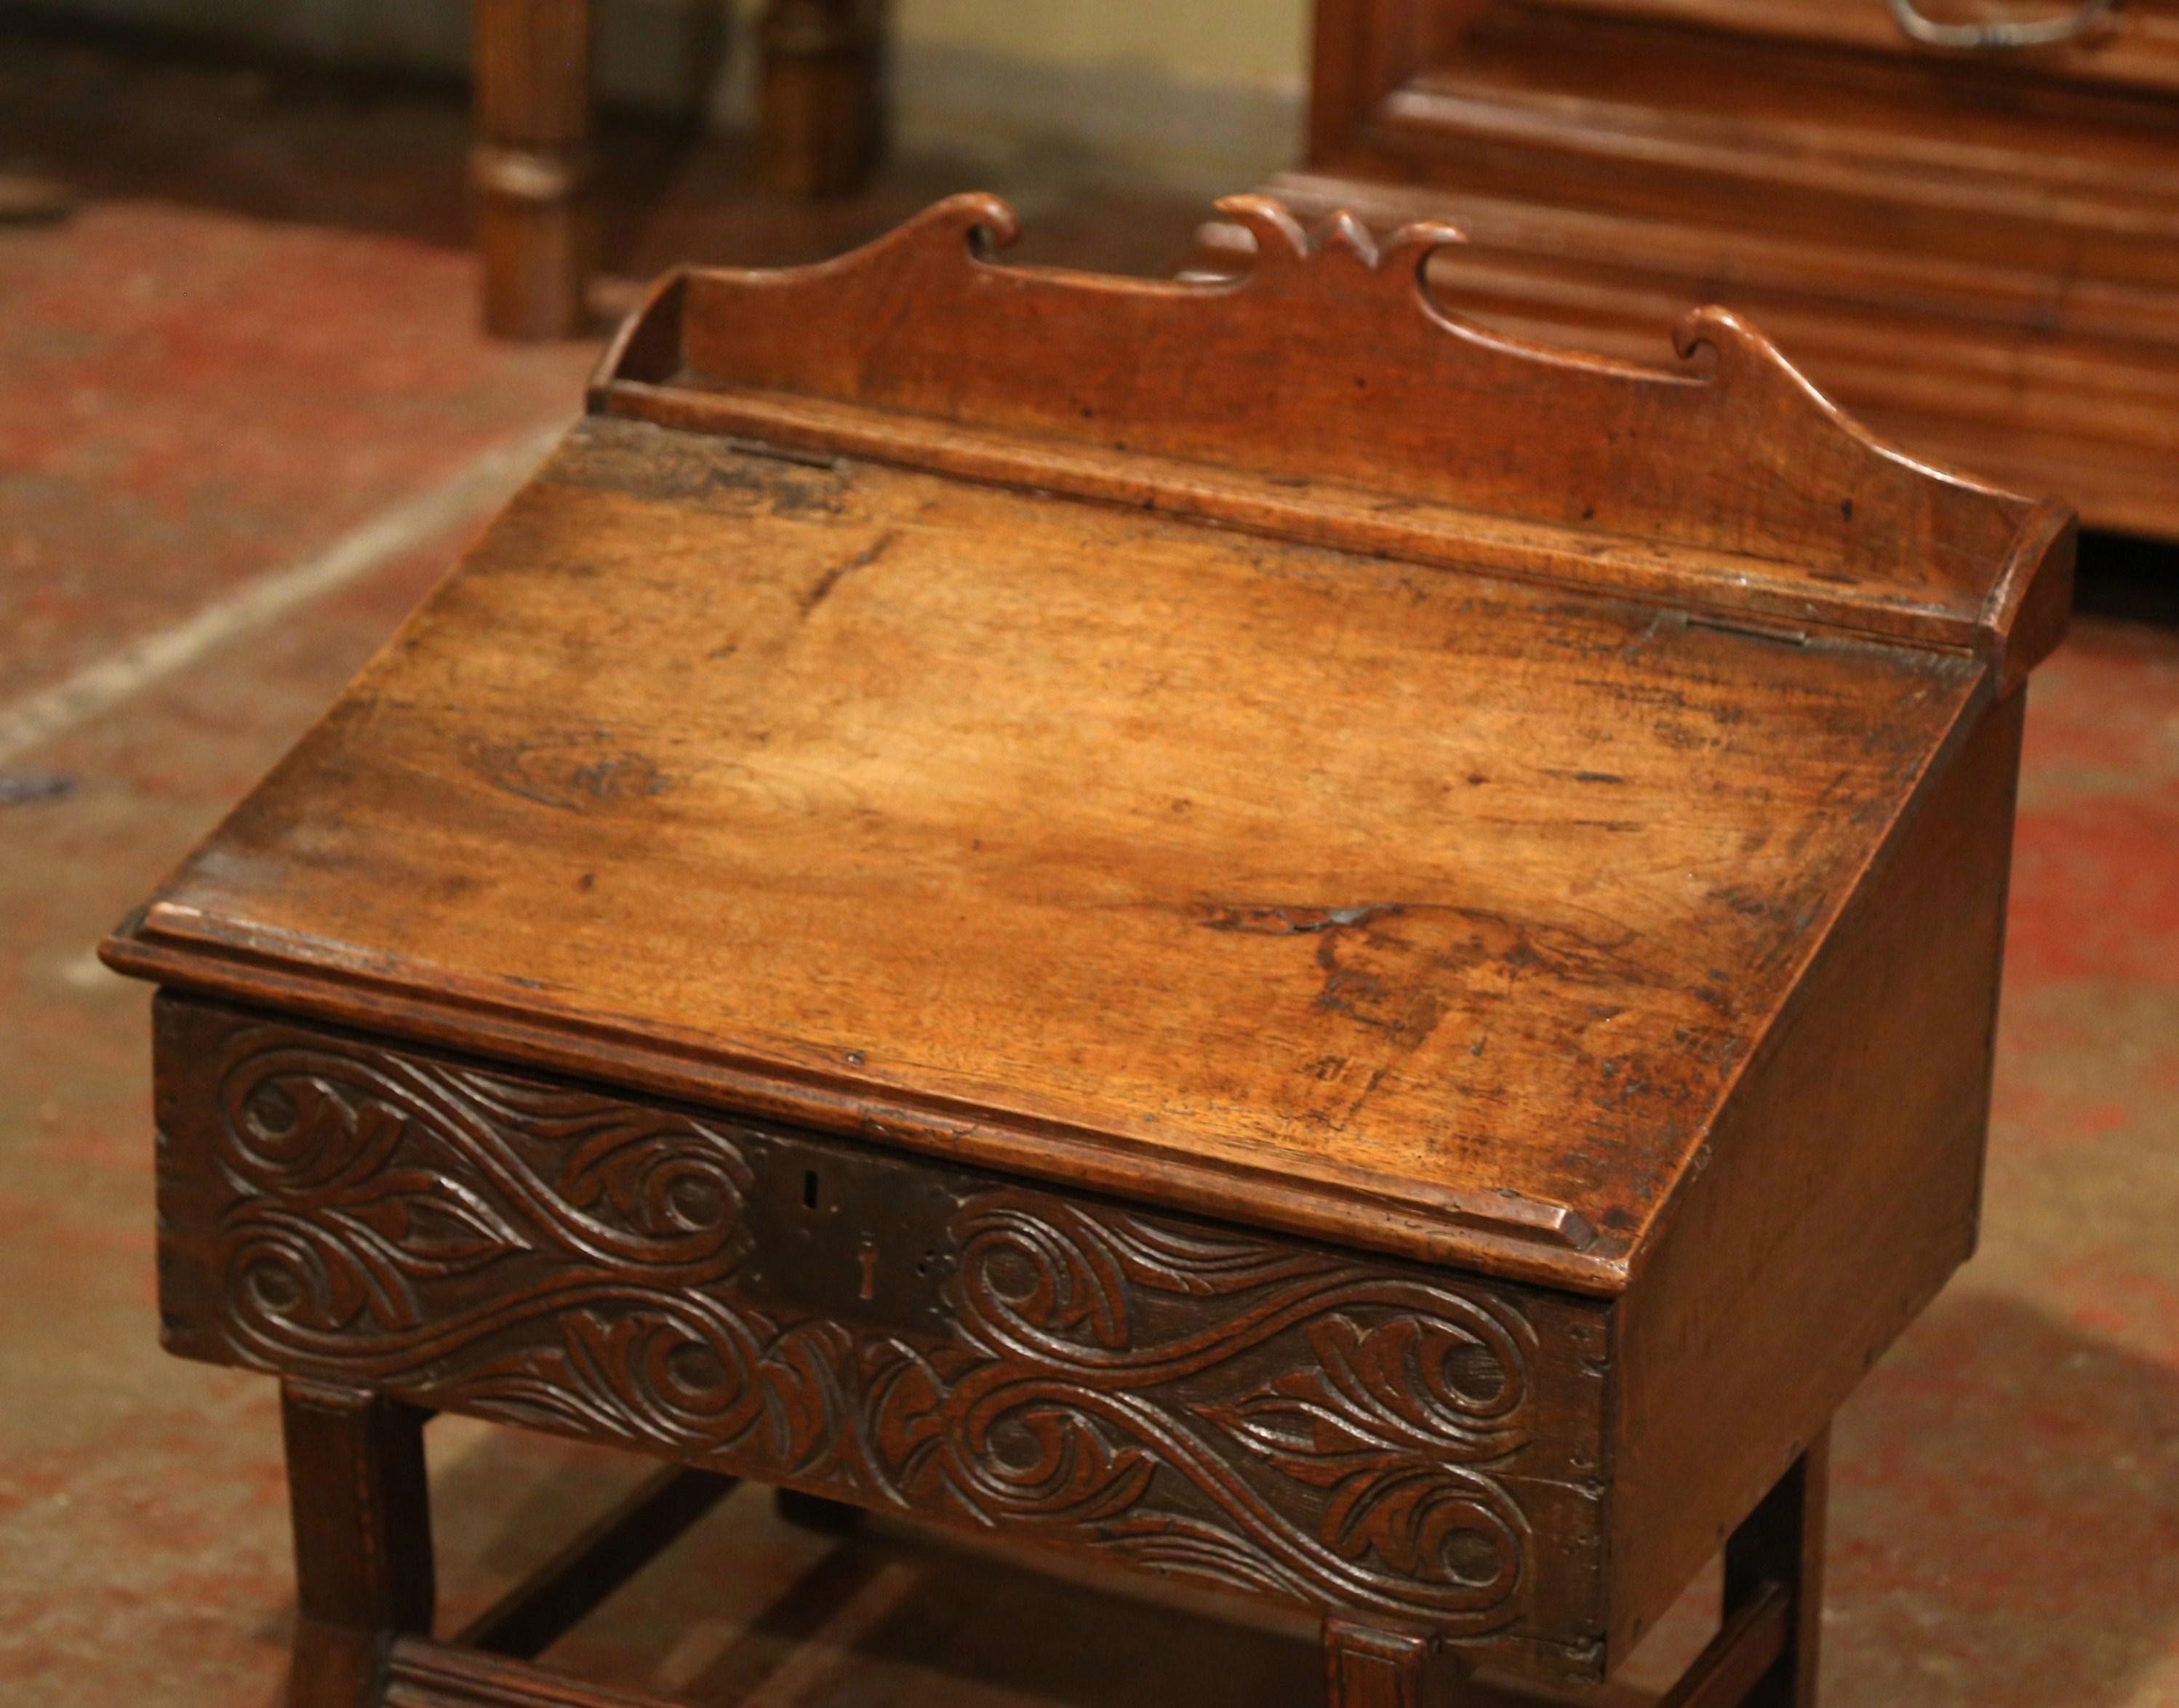 18th Century French Carved Walnut Desk on Legs with Slant Top and Inside Storage For Sale 1